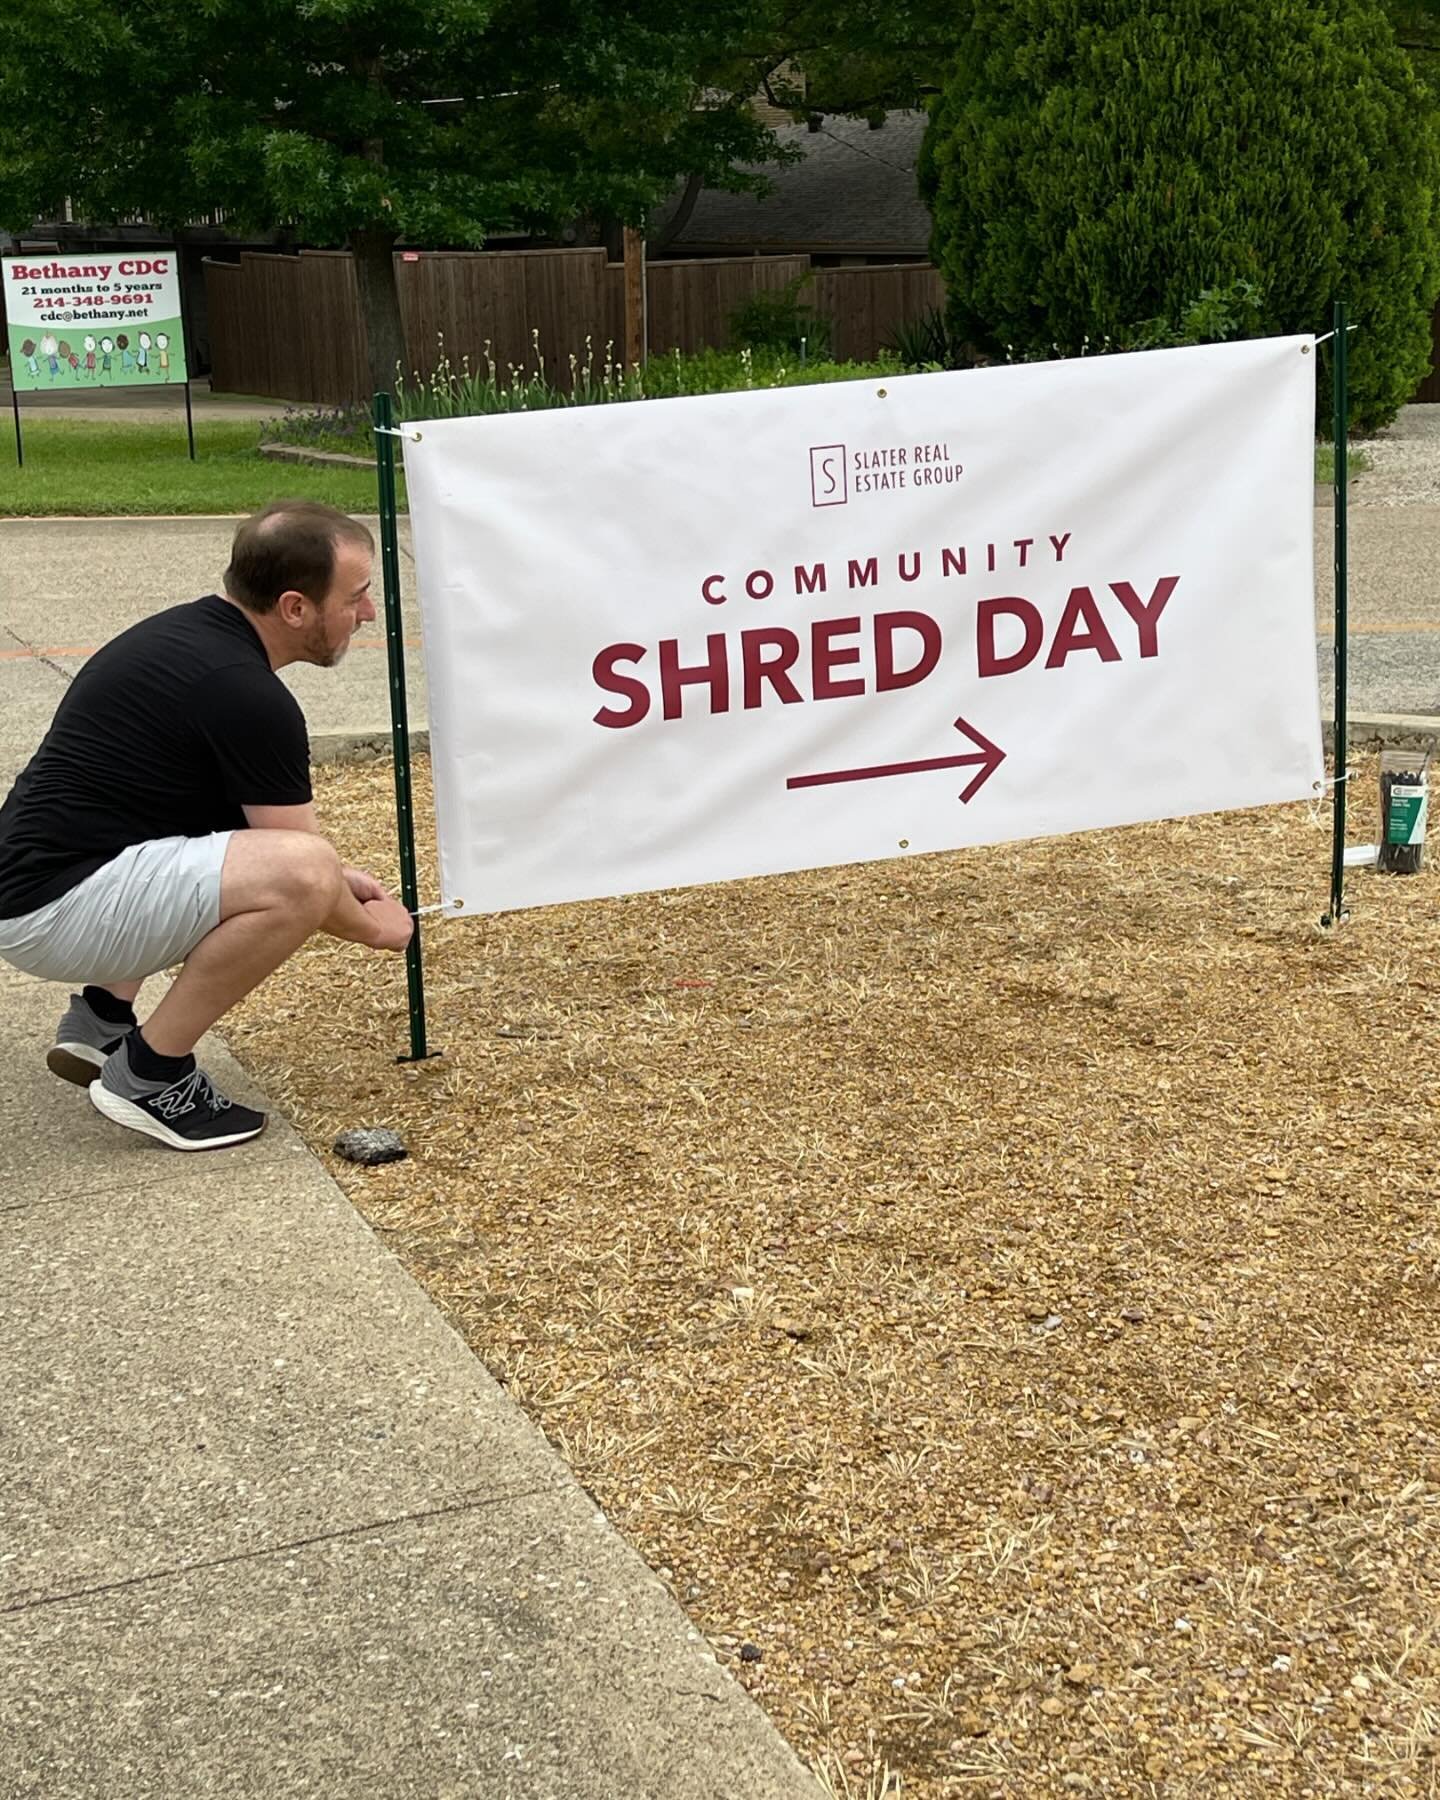 🎉 A Heartfelt Thank You to Our Community! 📃✂️

The Slater Real Estate Group is overflowing with gratitude to everyone who joined us for our annual Free Community Shred Event. It was a day filled with community spirit, beaming faces, and lucky we we